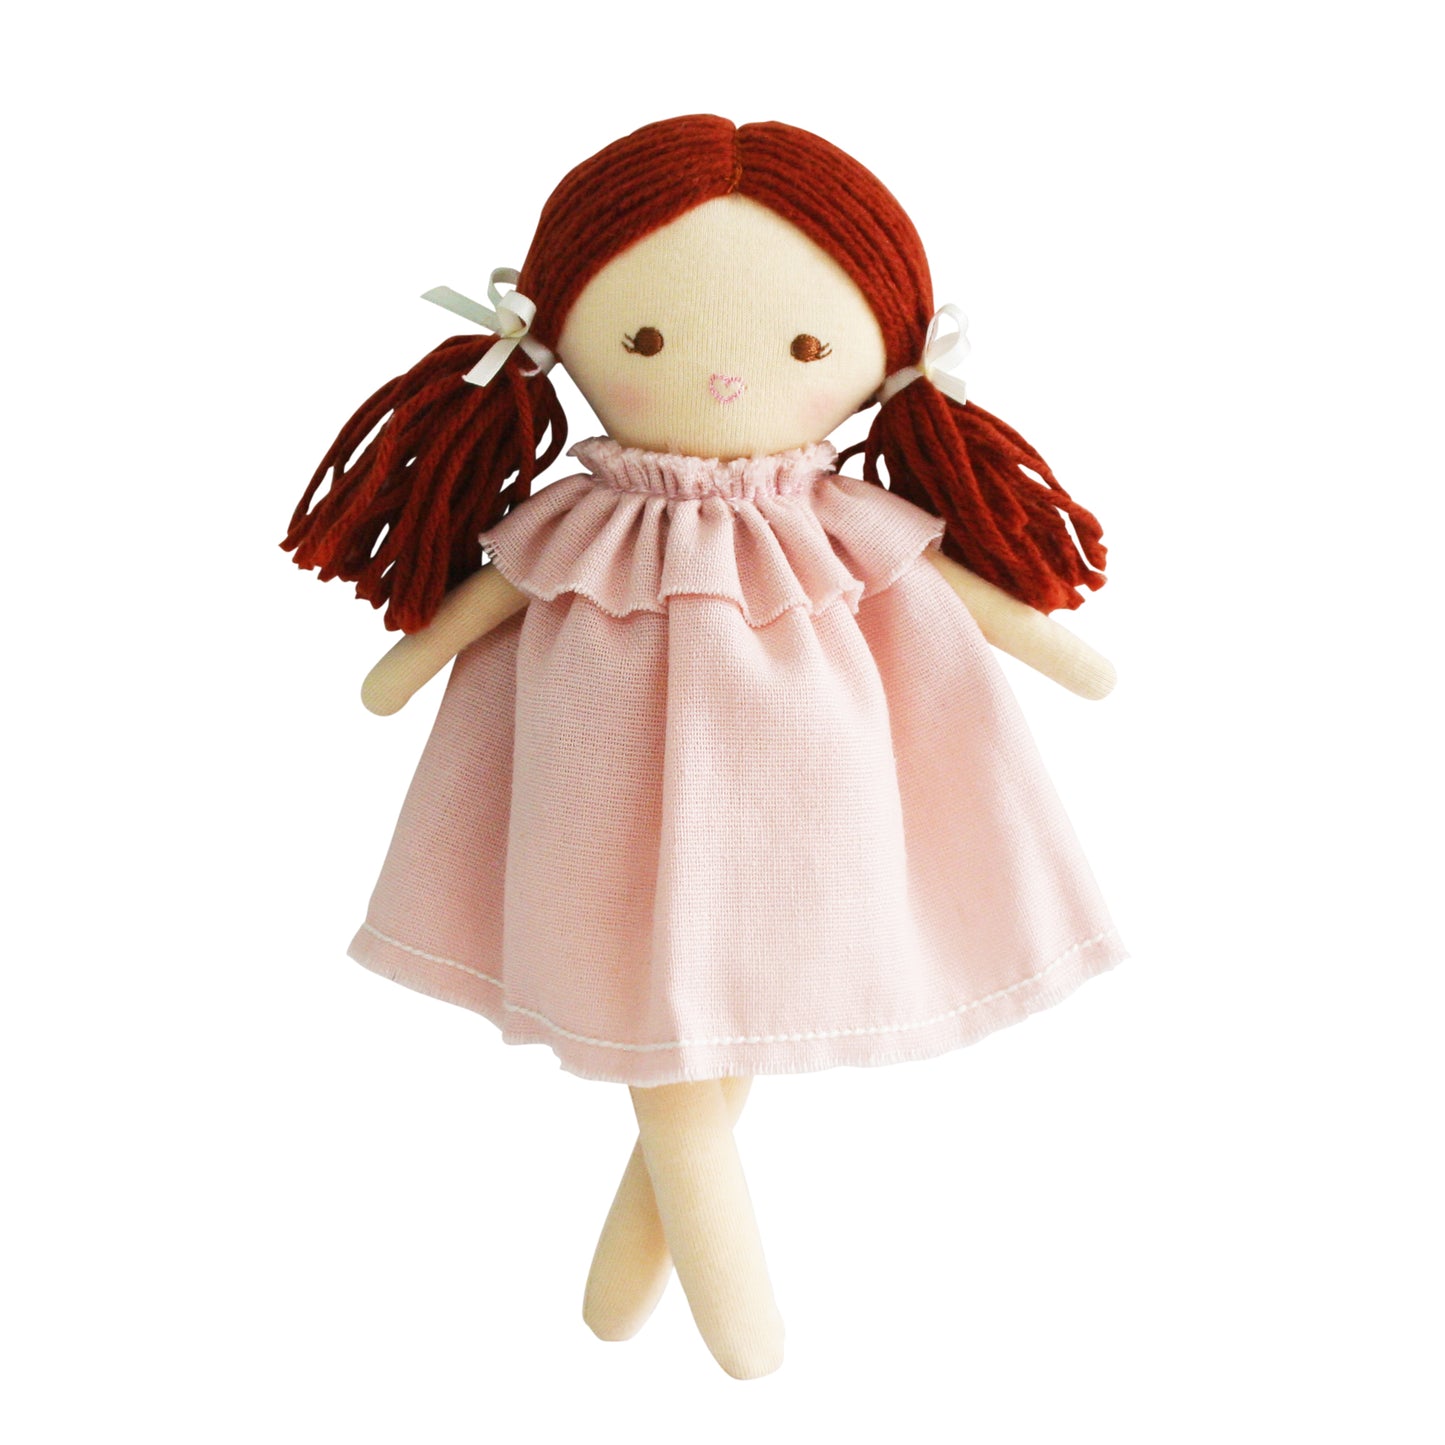 Mini matilda is an adorable doll with gorgeous red hair and an on trend pink linen frock that is removable, encouraging developmental play. 